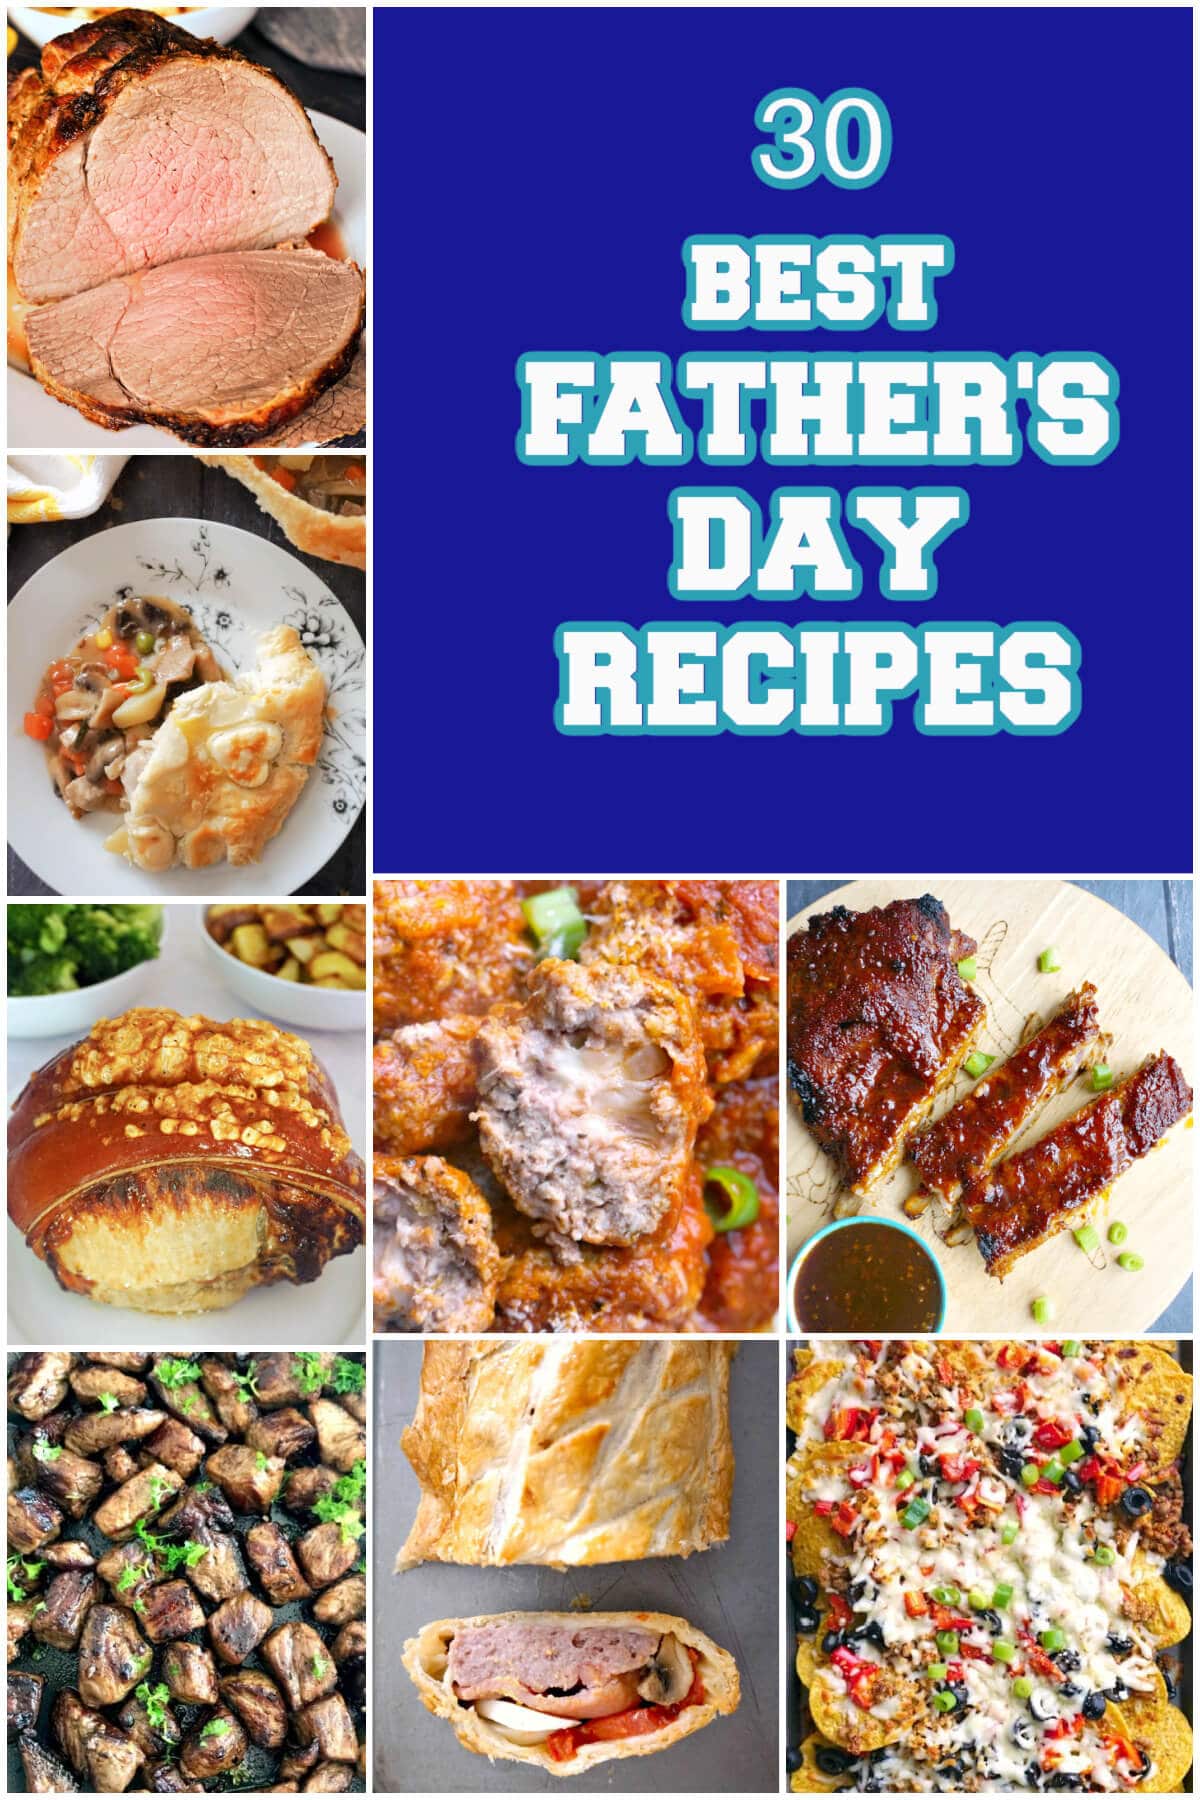 Recipes for Father's Day.